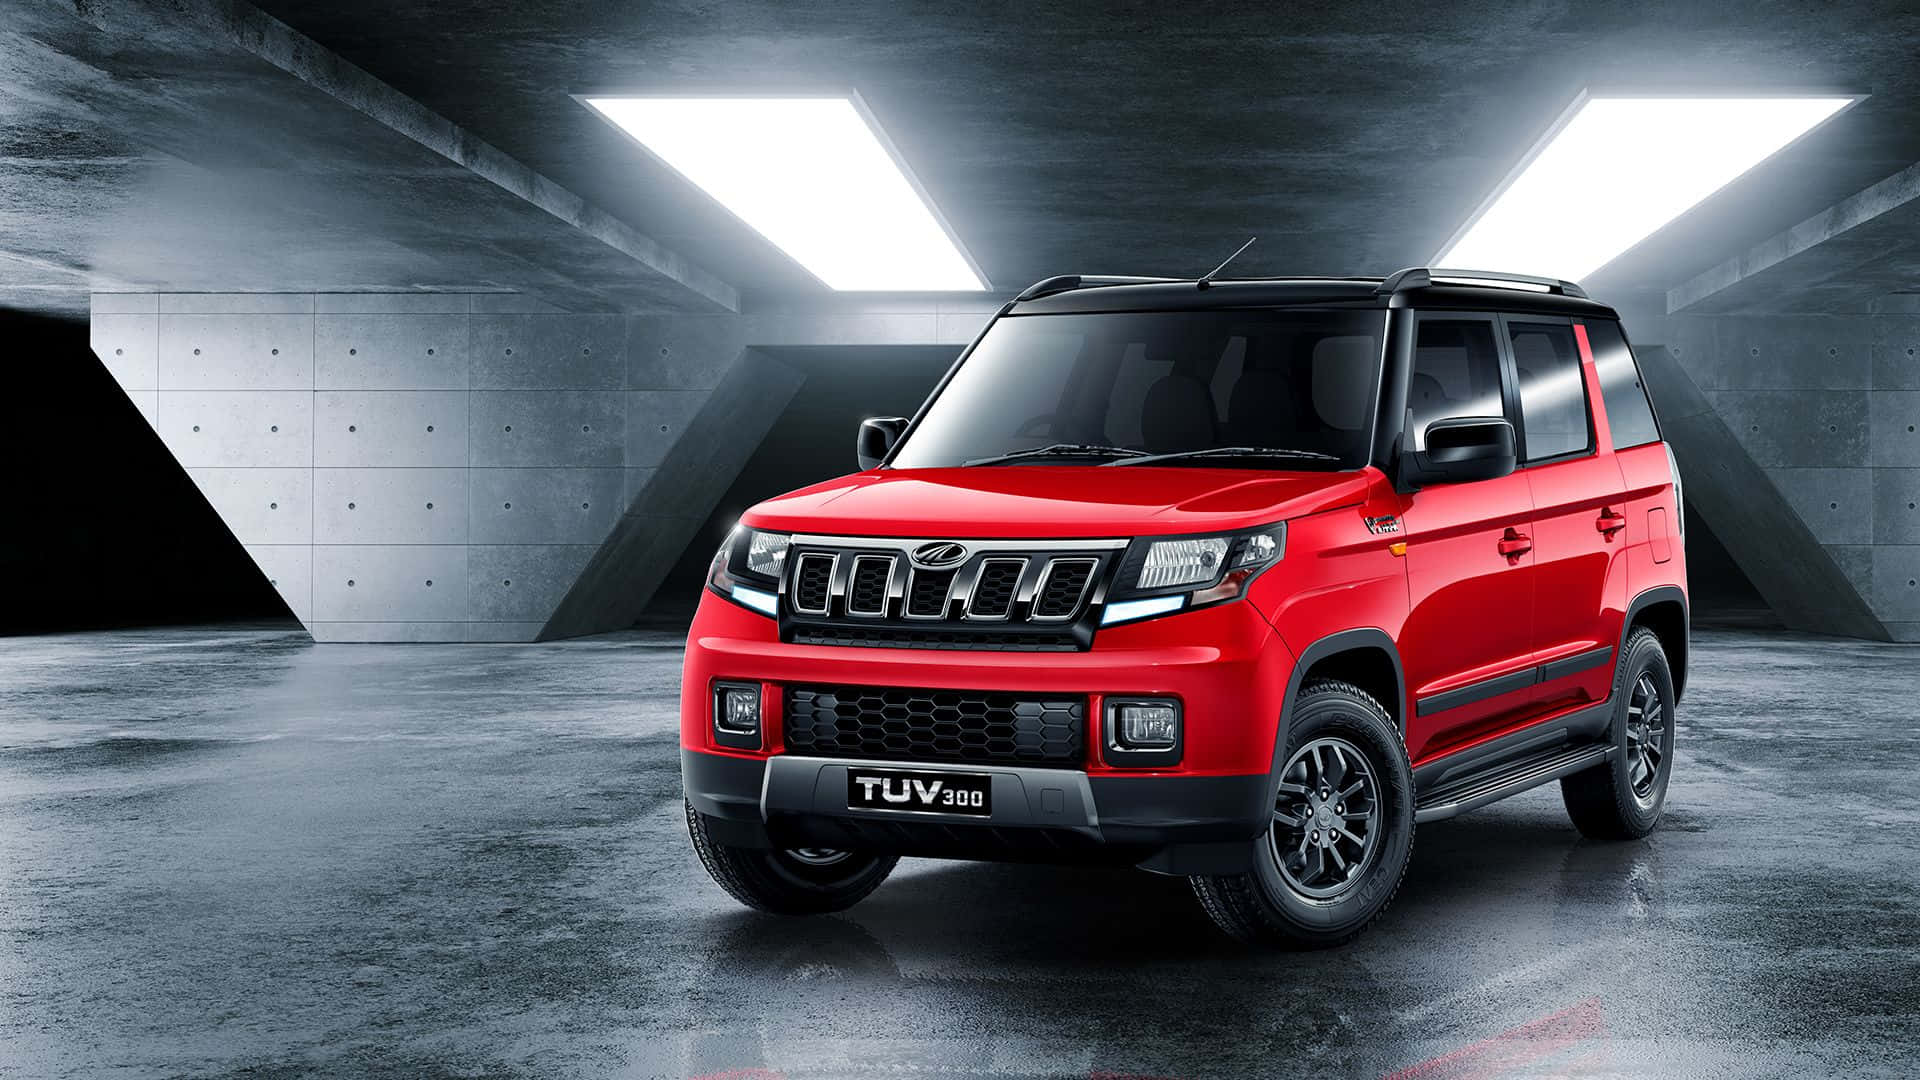 Stylish Mahindra SUV cruising on a picturesque highway Wallpaper